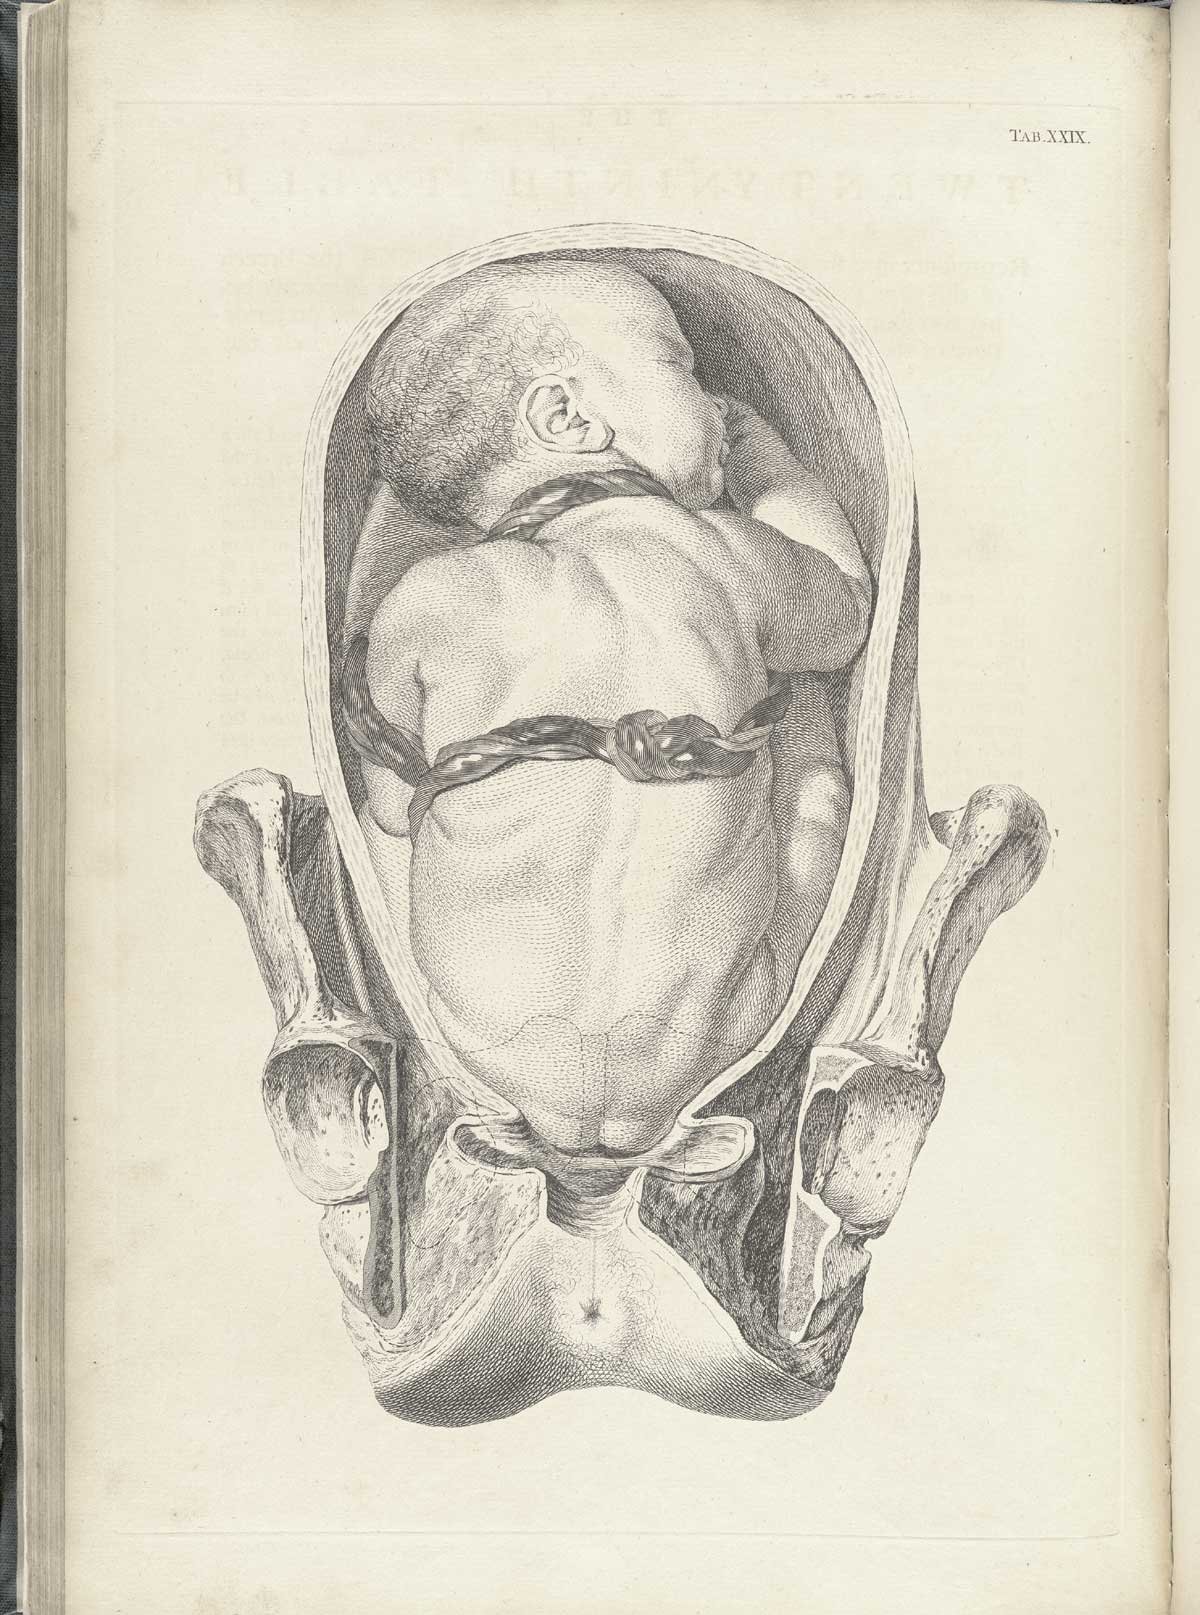 Table 29 of William Smellie's A sett of anatomical tables, with explanations, and an abridgment, of the practice of midwifery, featuring the illustrated drawing of a woman's uterus with a fetus resting in breech position and the imbilical cord wrapped around its back and neck.